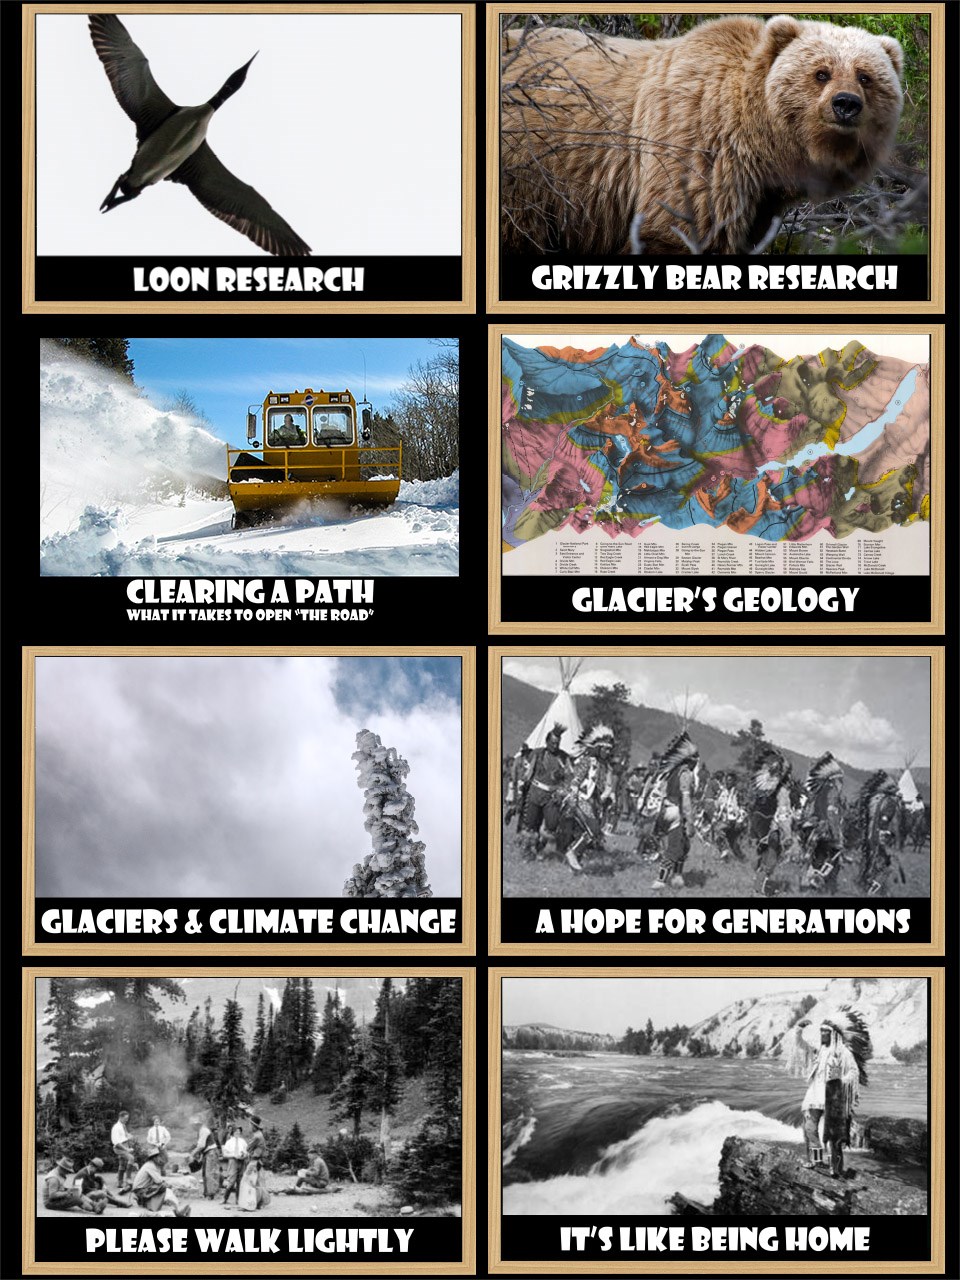 A grid of 8 photos which, when clicked, will take you to one of the eight videos which are: Loon Research, Grizzly Research, Clearing a Path (what it takes to clear the Going-to-the-Sun-Road, Glacier's Geology, Glaciers and Climate Change, and three Nati